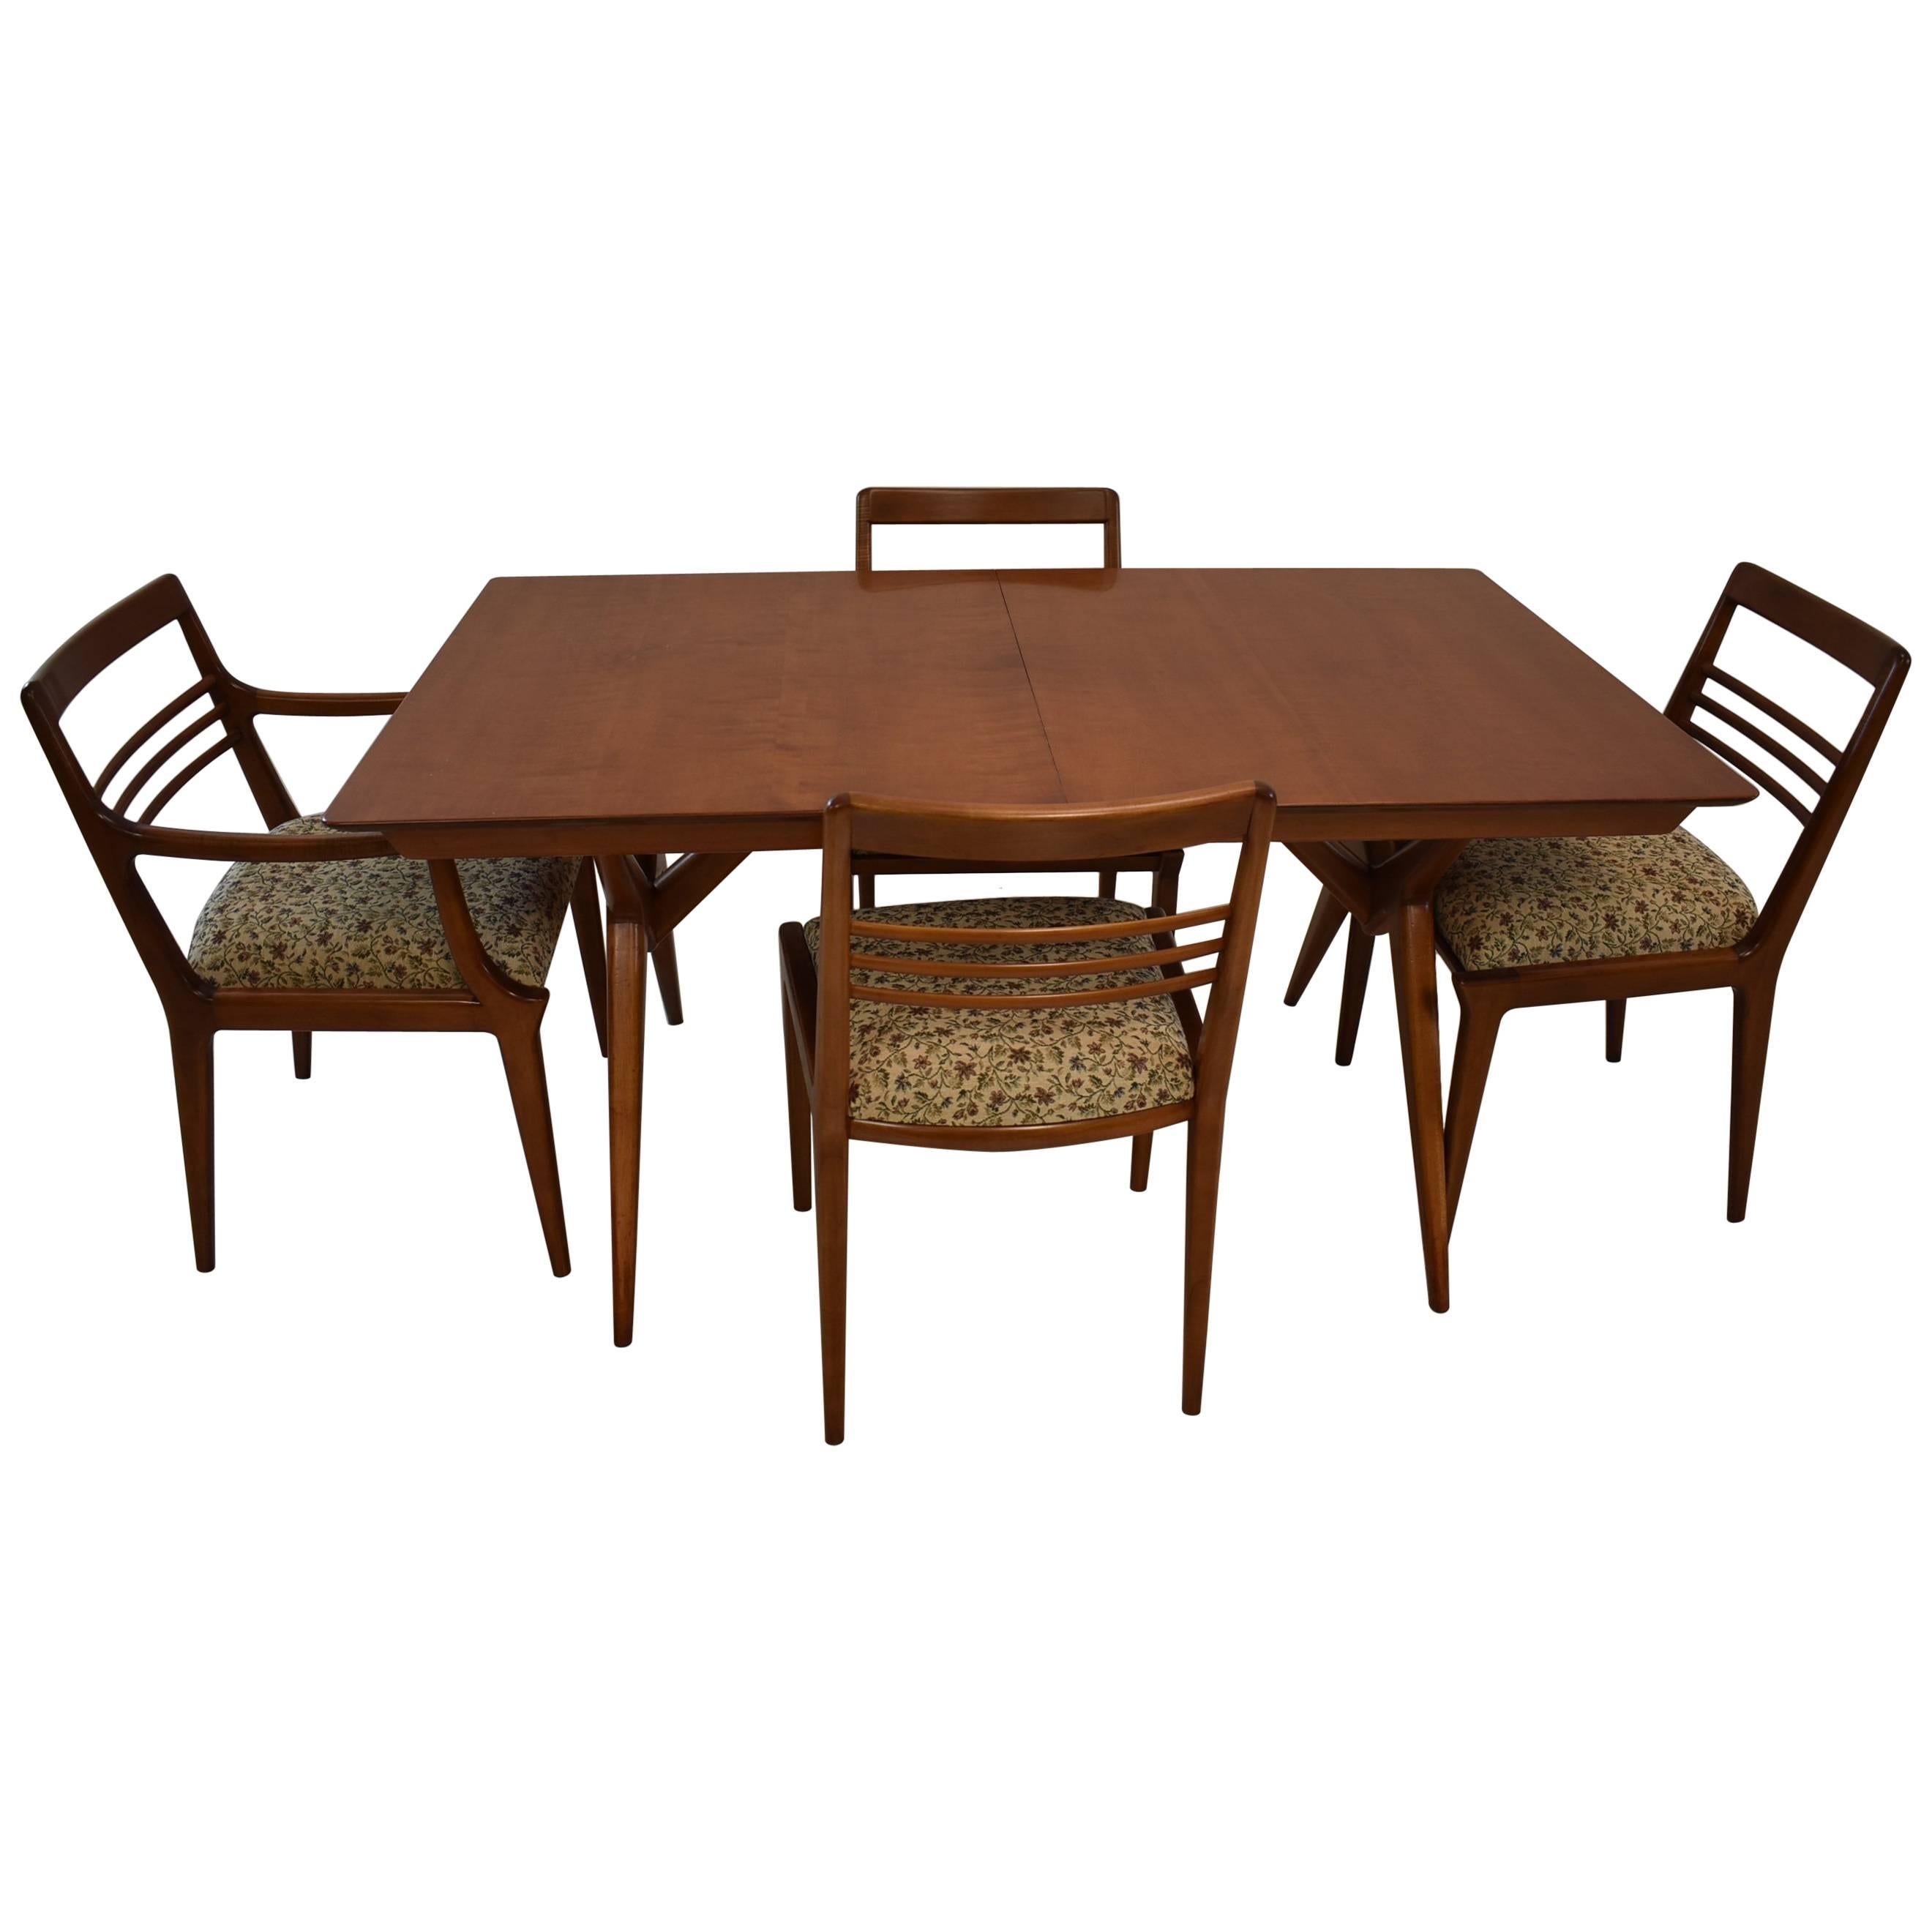 Mid-Century Modern Dining Room Table and Four Chairs, Johnson Furniture Company